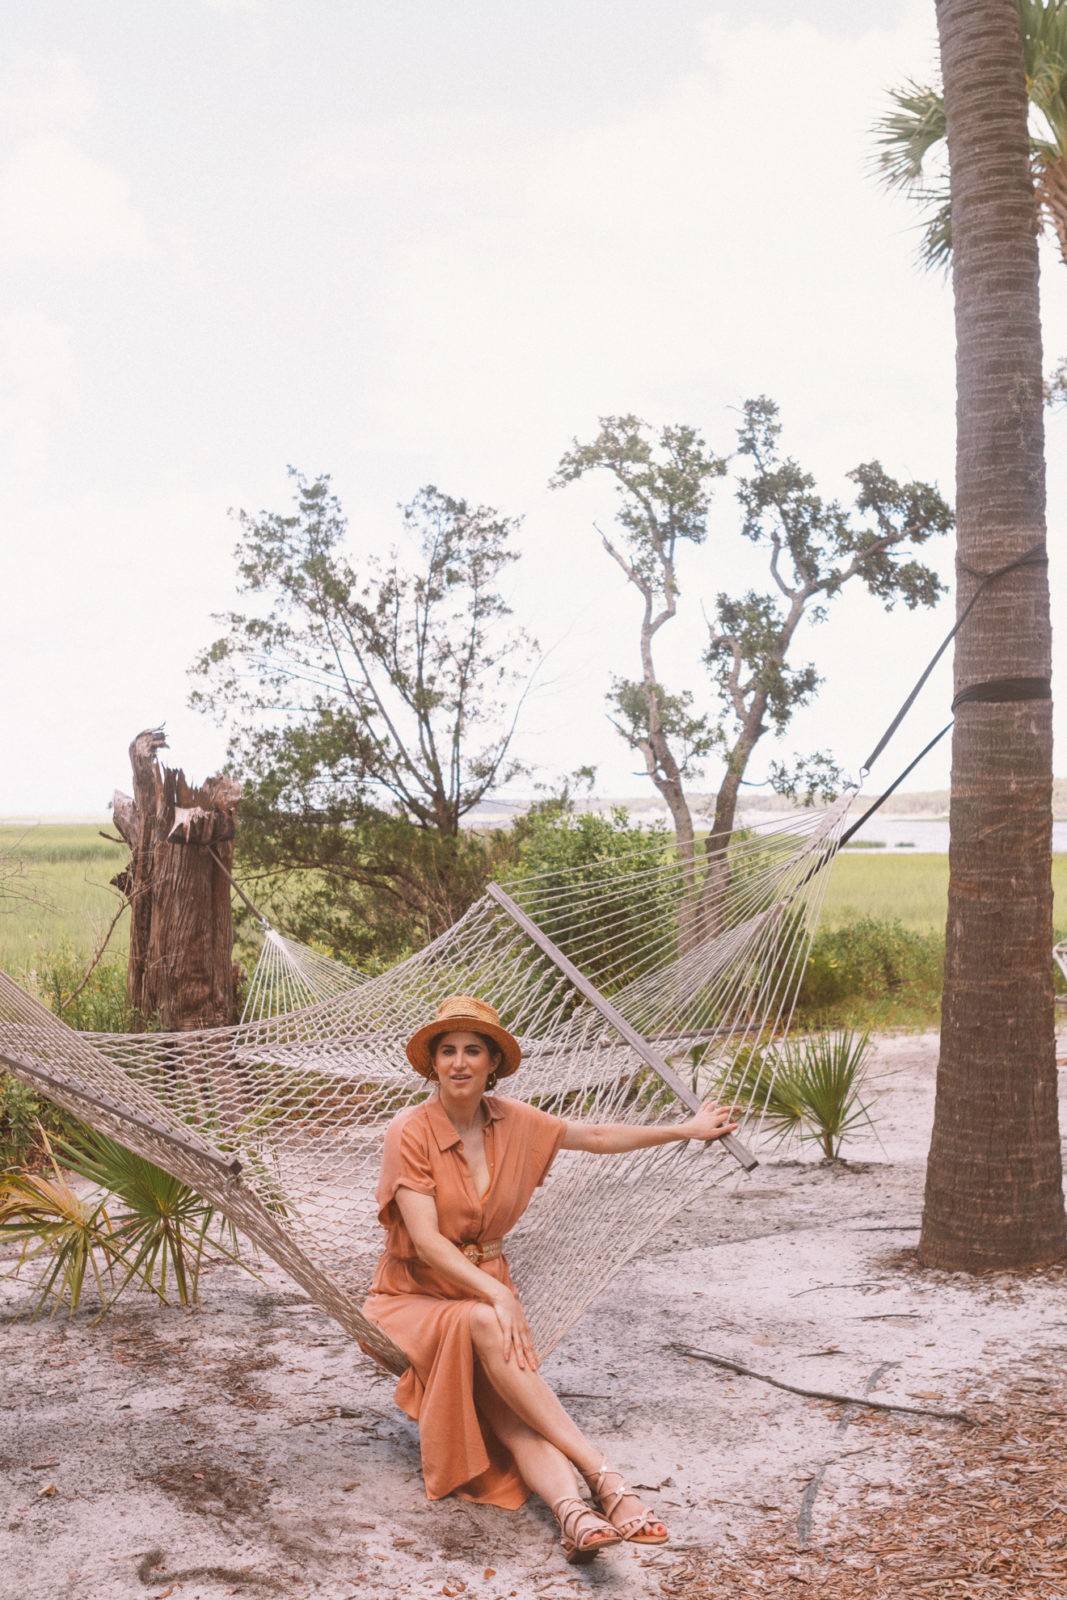 Montage Palmetto Bluff Resort Review by Luxury Travel Blogger Laura Lily: image of a woman sitting outside in a hammock.